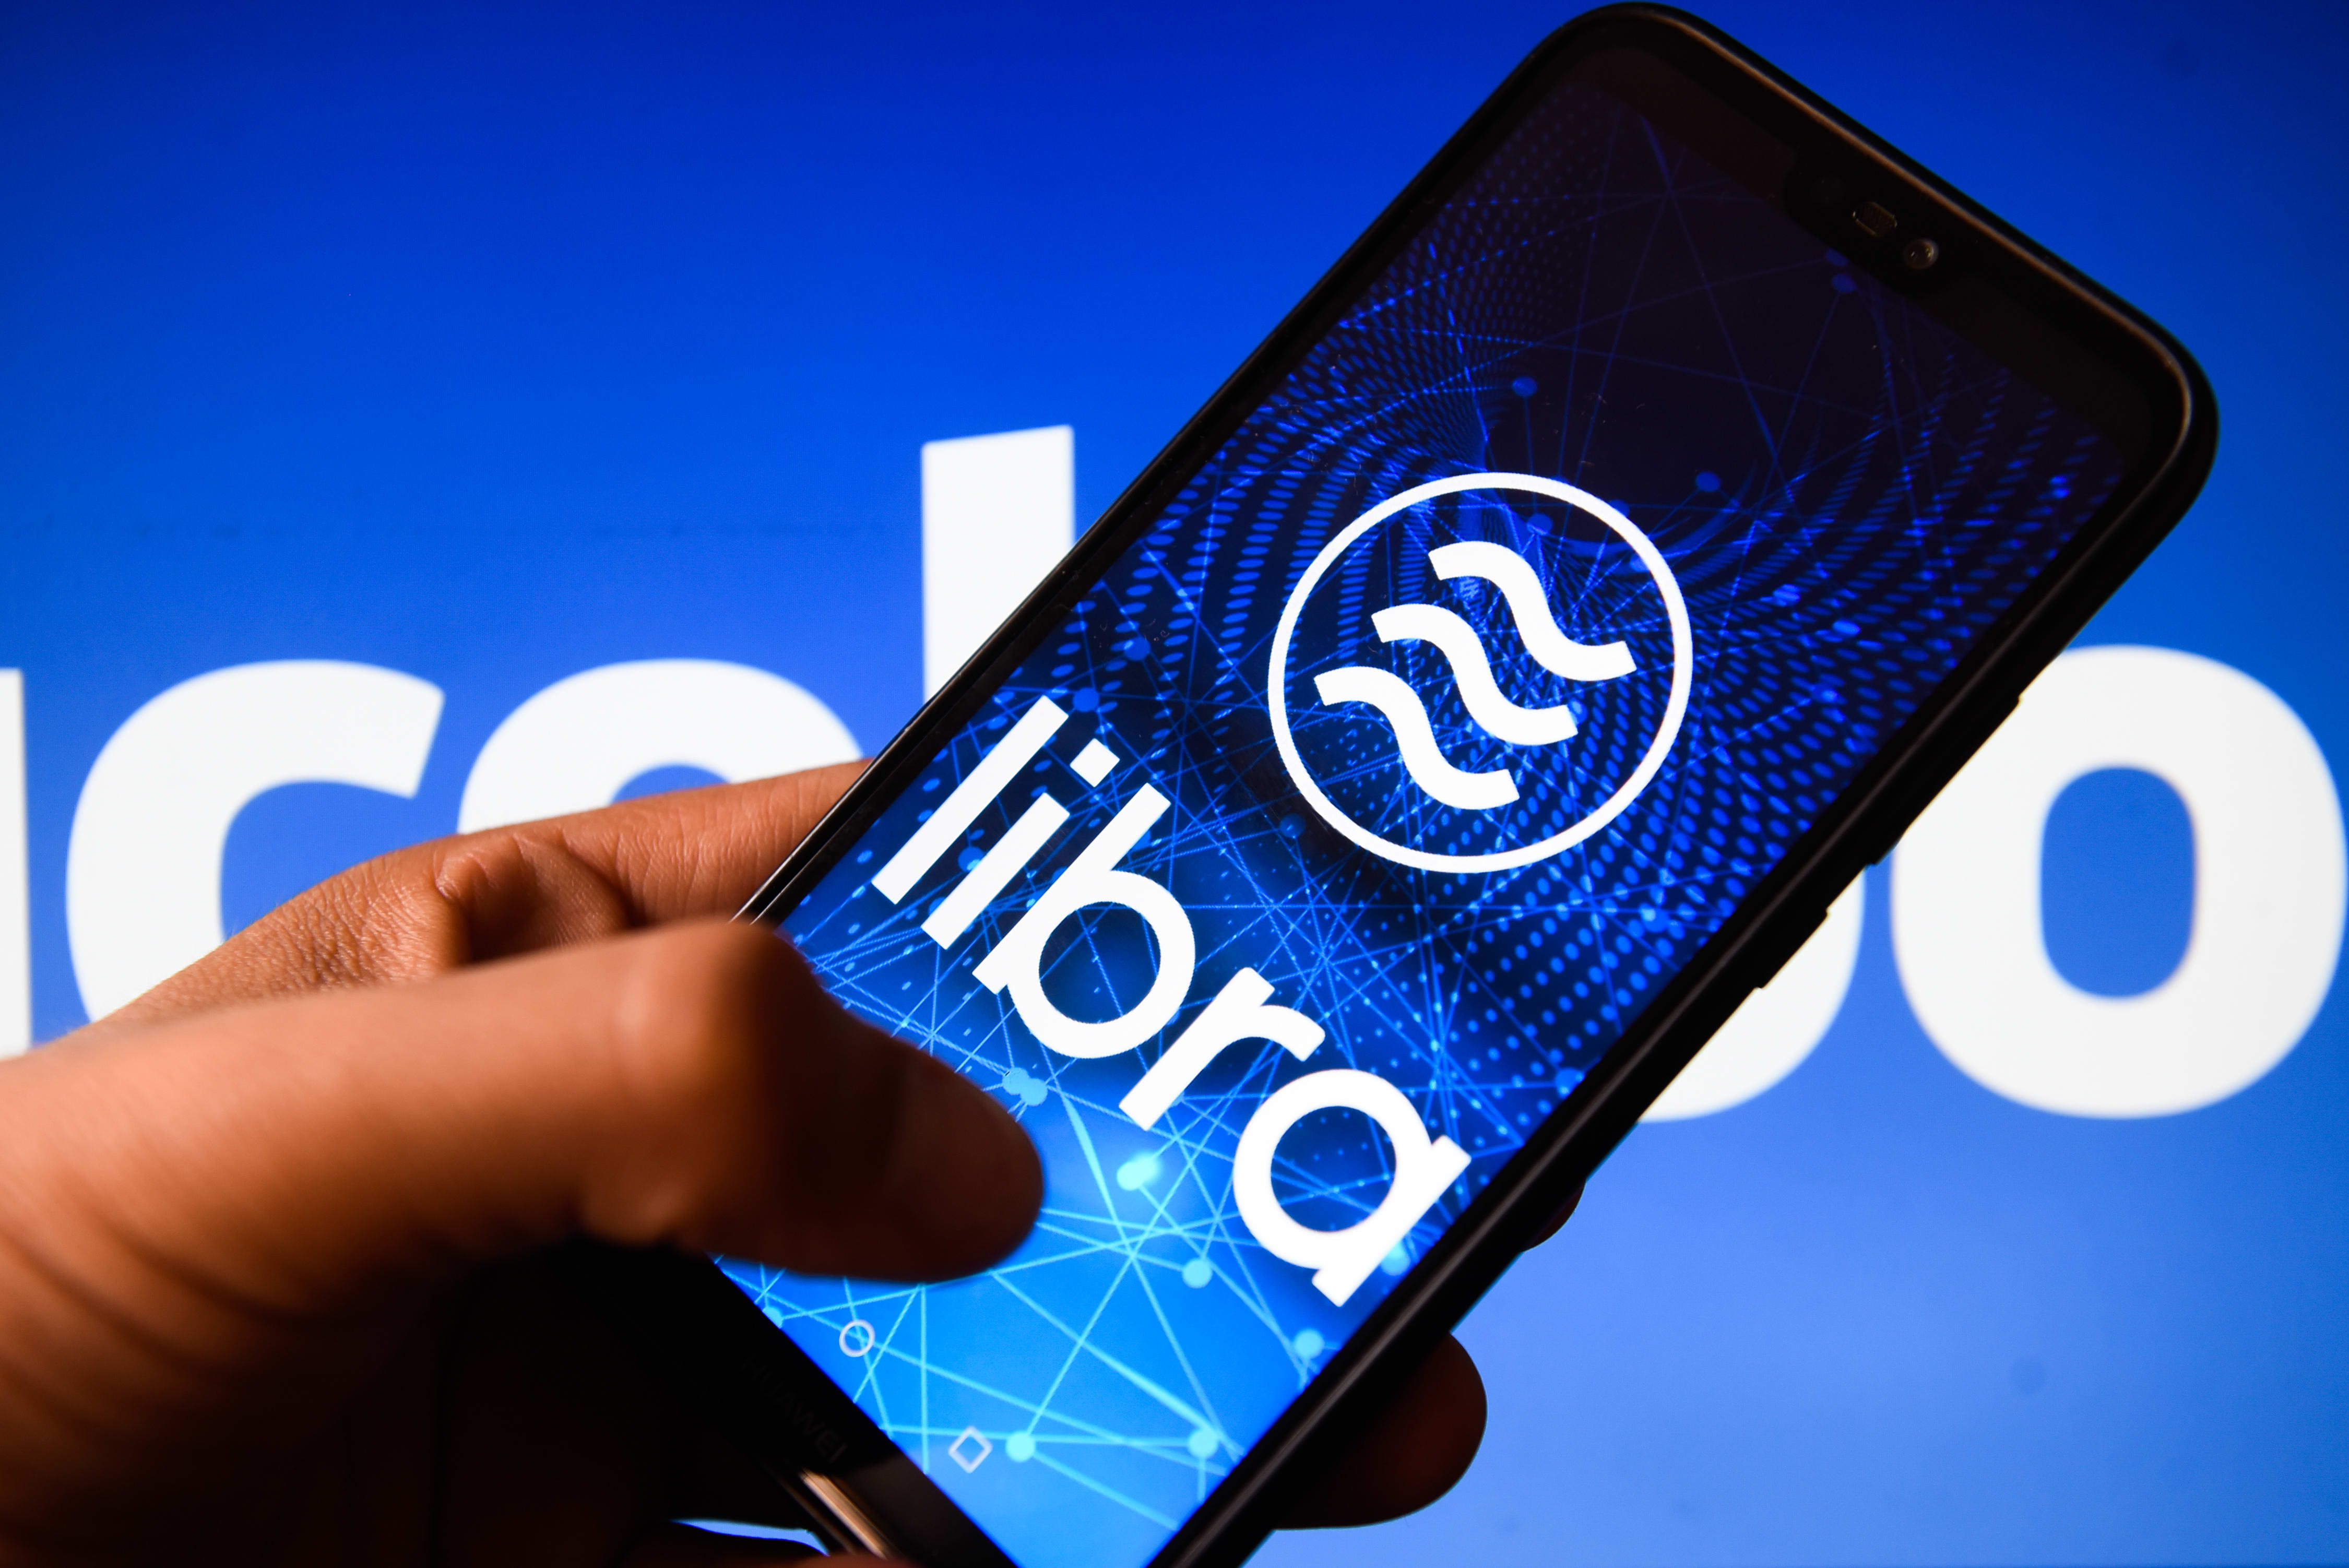 Libra Association to apply for payments license in Switzerland